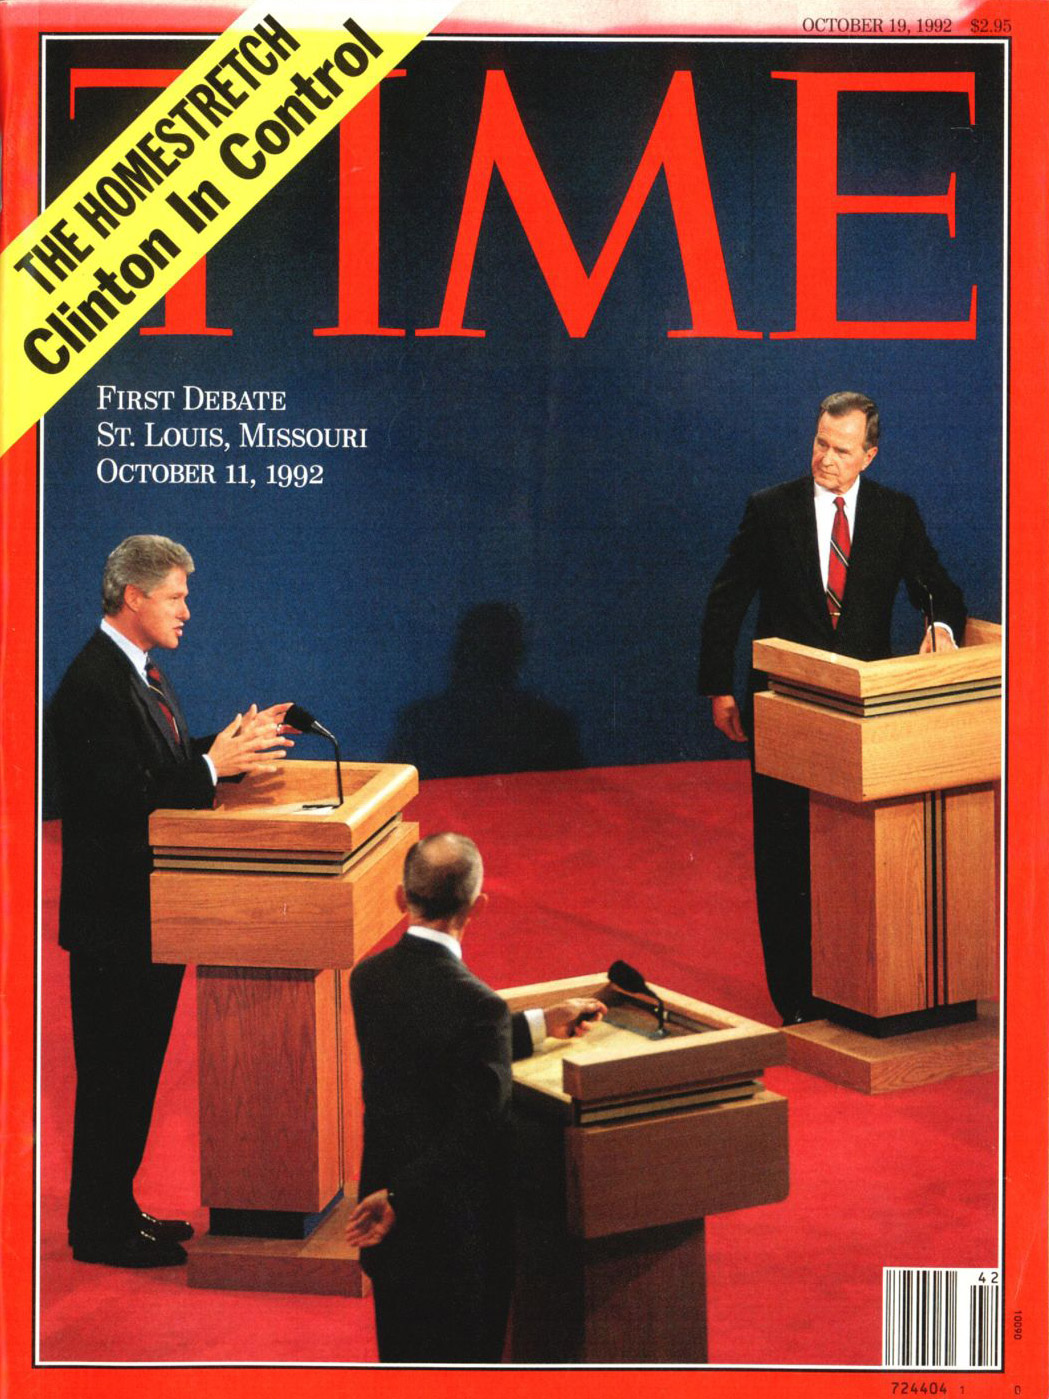 Bill Clinton and George H.W. Bush on the Oct. 19, 1992, cover of TIME. Photo by Cynthia Johnson.